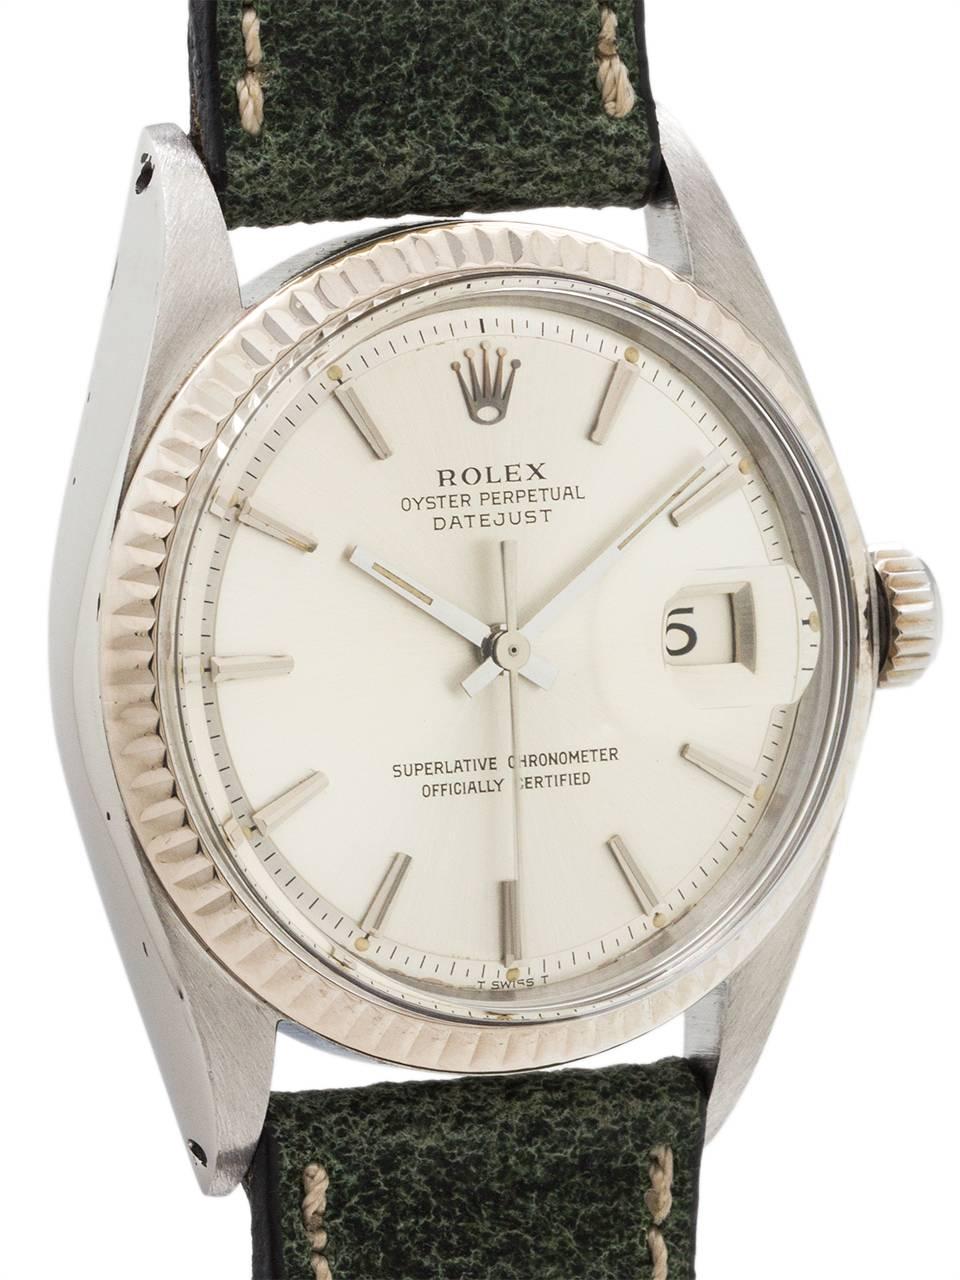 Aesthetic Movement Rolex Yellow Gold Stainless Steel Datejust Ref 1601, circa 1970 For Sale